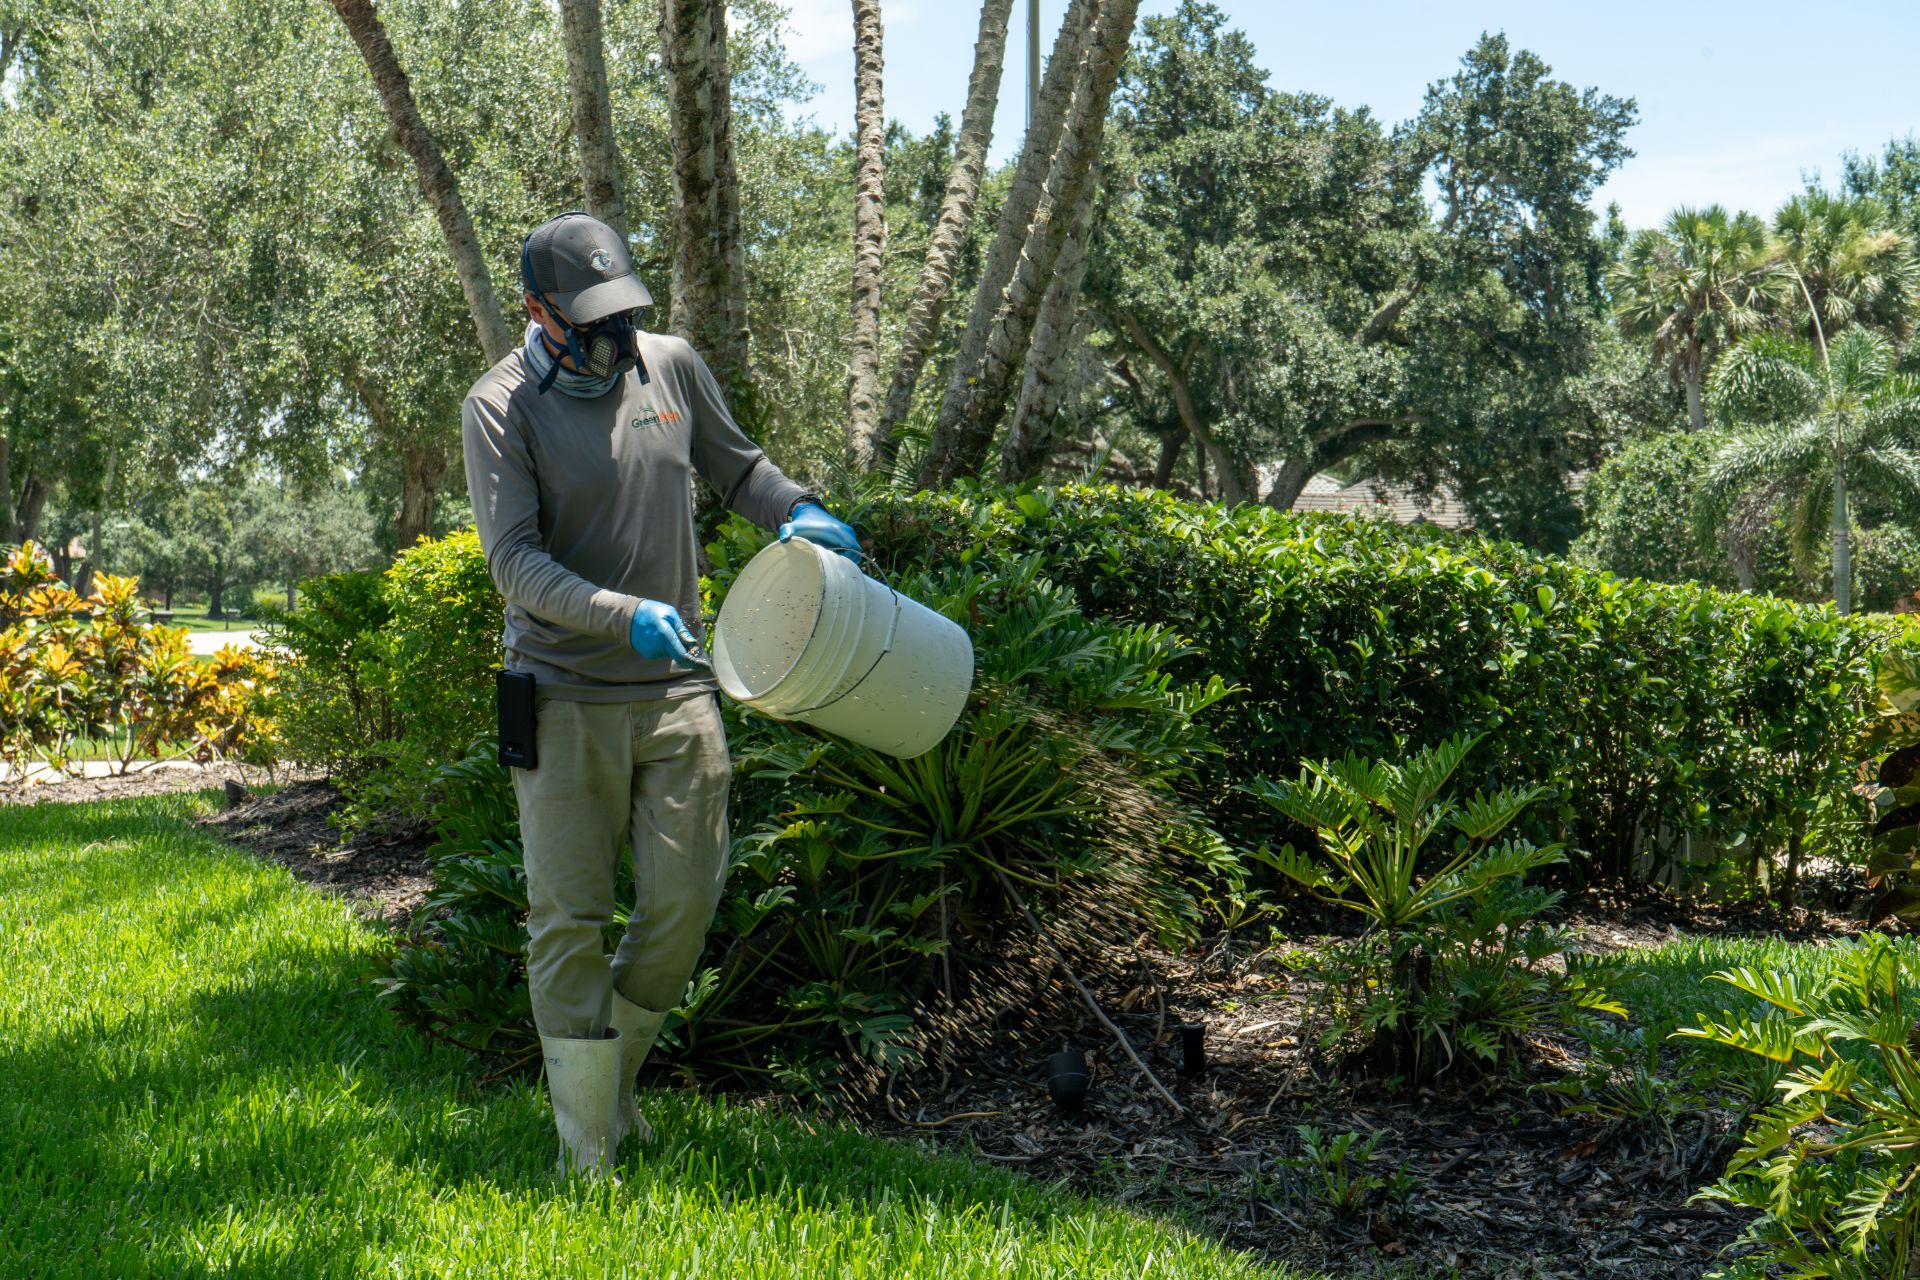 A GreenEdge staff member diligently working in proper uniform and wearing a mask in Sarasota. Our team prioritizes safety and follows strict protocols to ensure the well-being of our staff and clients. Trust GreenEdge for professional services delivered with utmost care and adherence to safety guidelines.